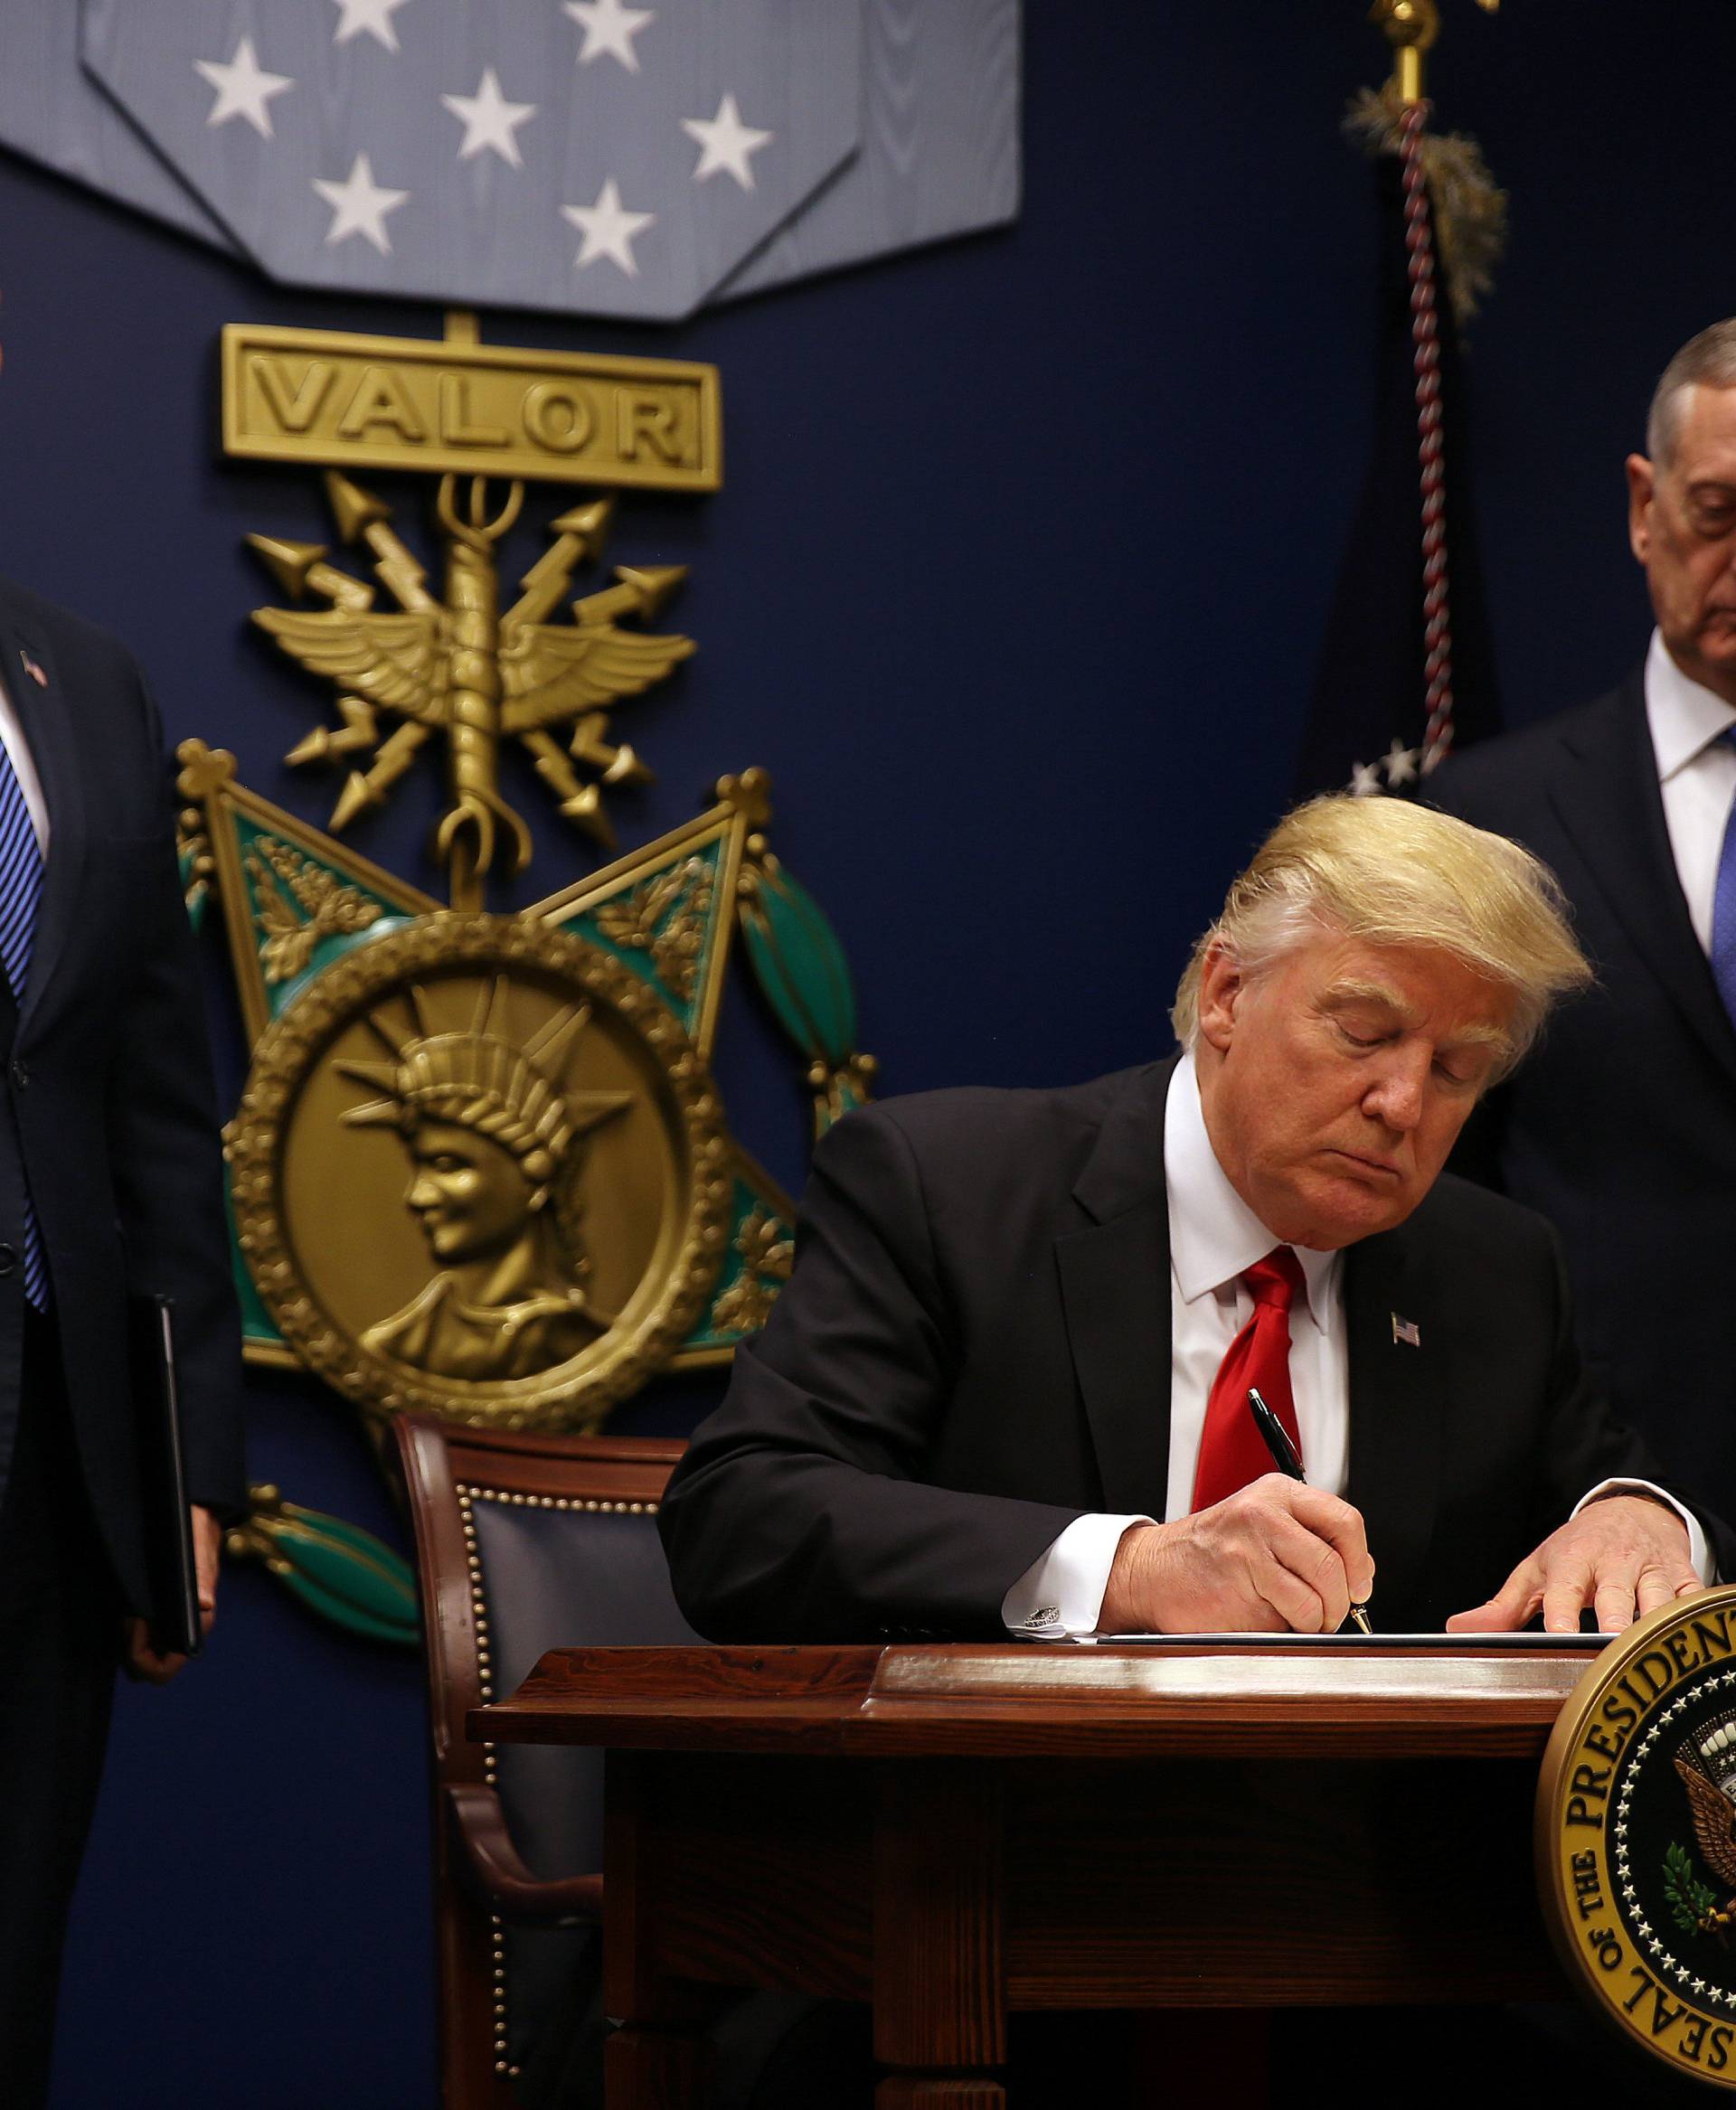 U.S. President Donald Trump signs an executive order he said would impose tighter vetting to prevent foreign terrorists from entering the United States at the Pentagon in Washington